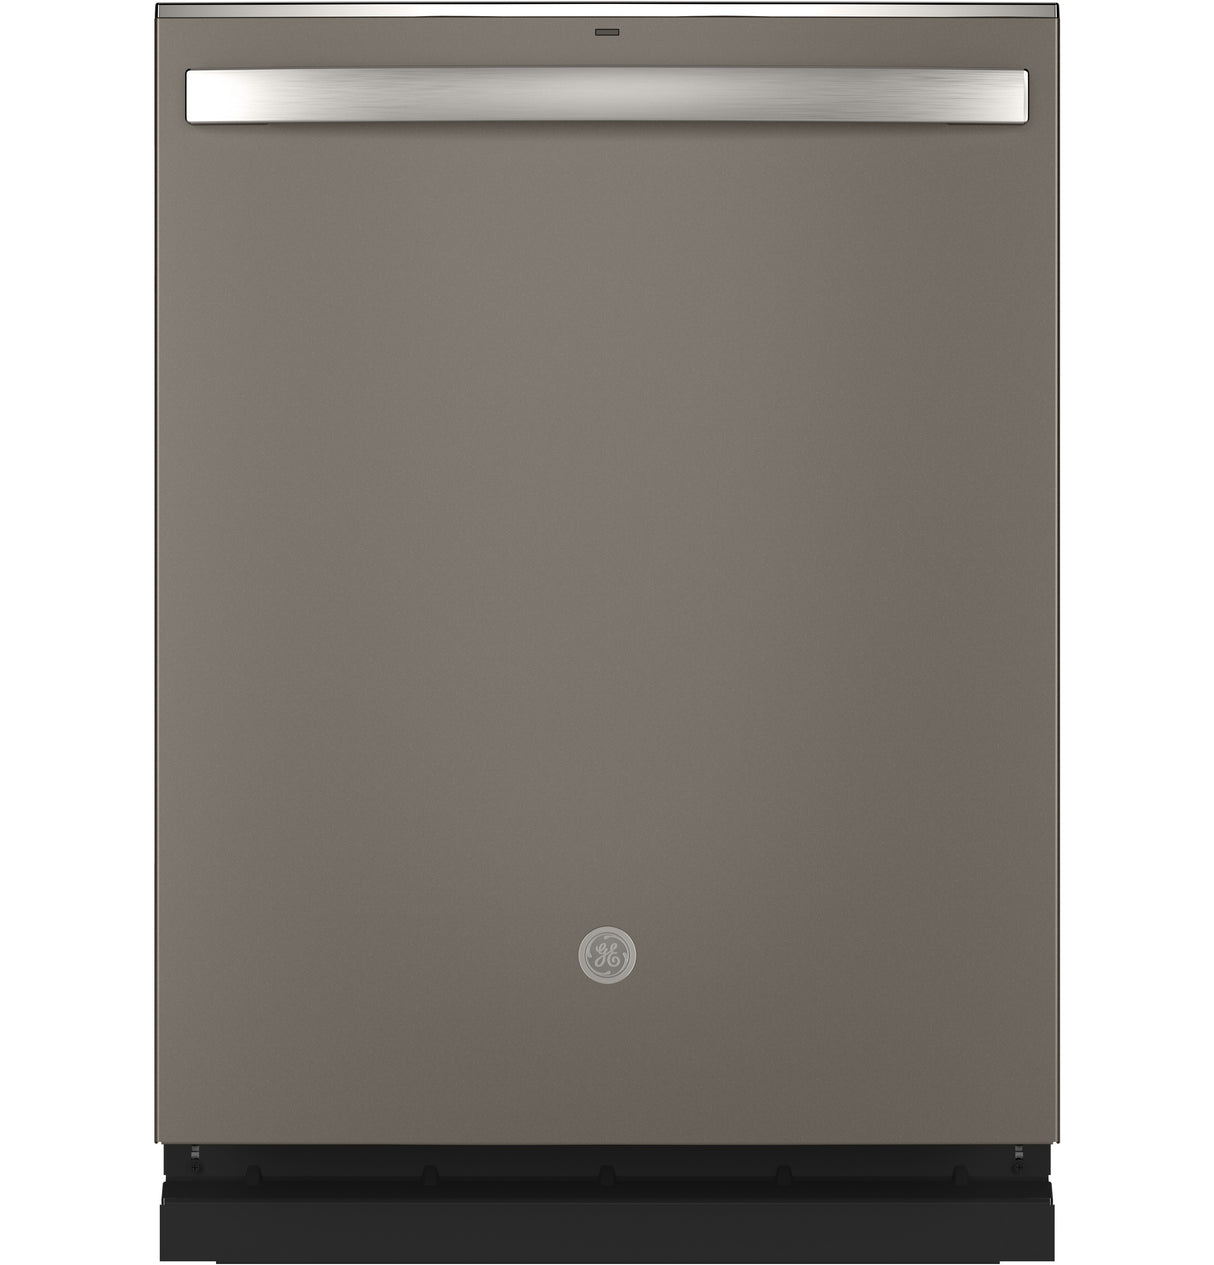 GE(R) ENERGY STAR(R) Top Control with Stainless Steel Interior Dishwasher with Sanitize Cycle & Dry Boost with Fan Assist - (GDT645SMNES)